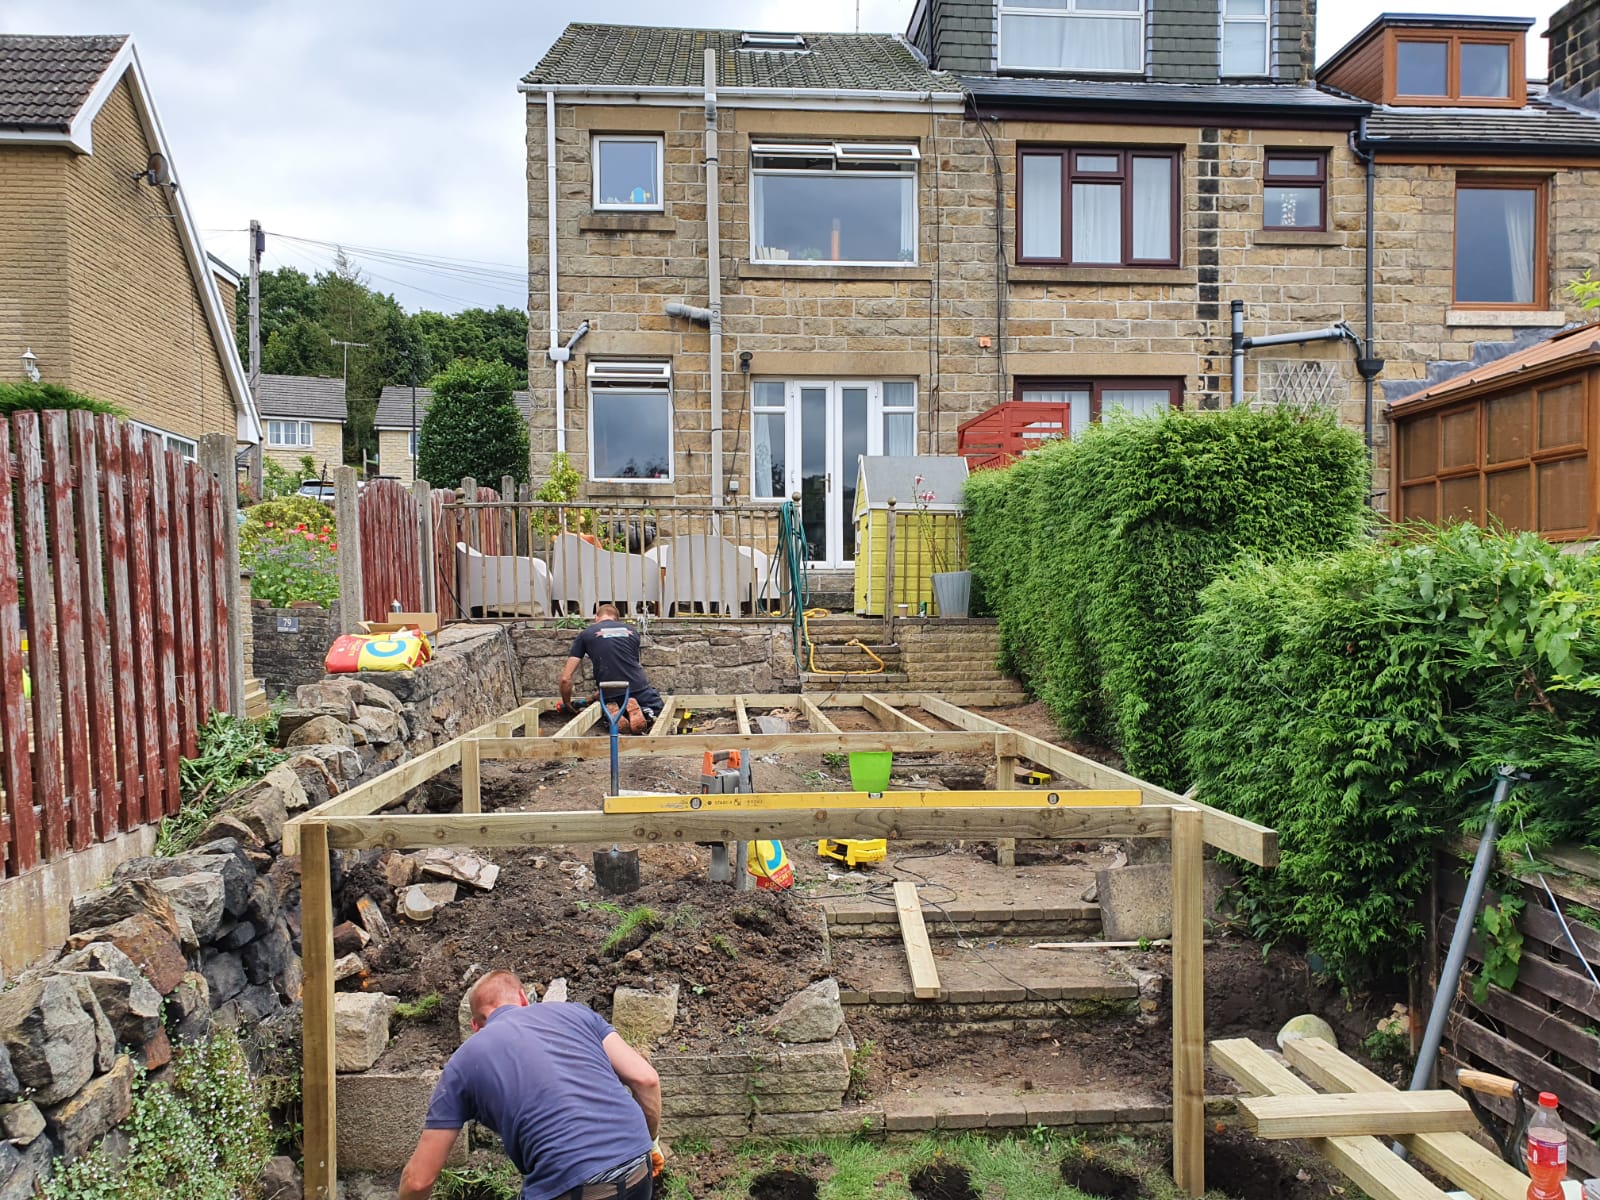 Raised wooden decking being constructed in a Cardiff back garden